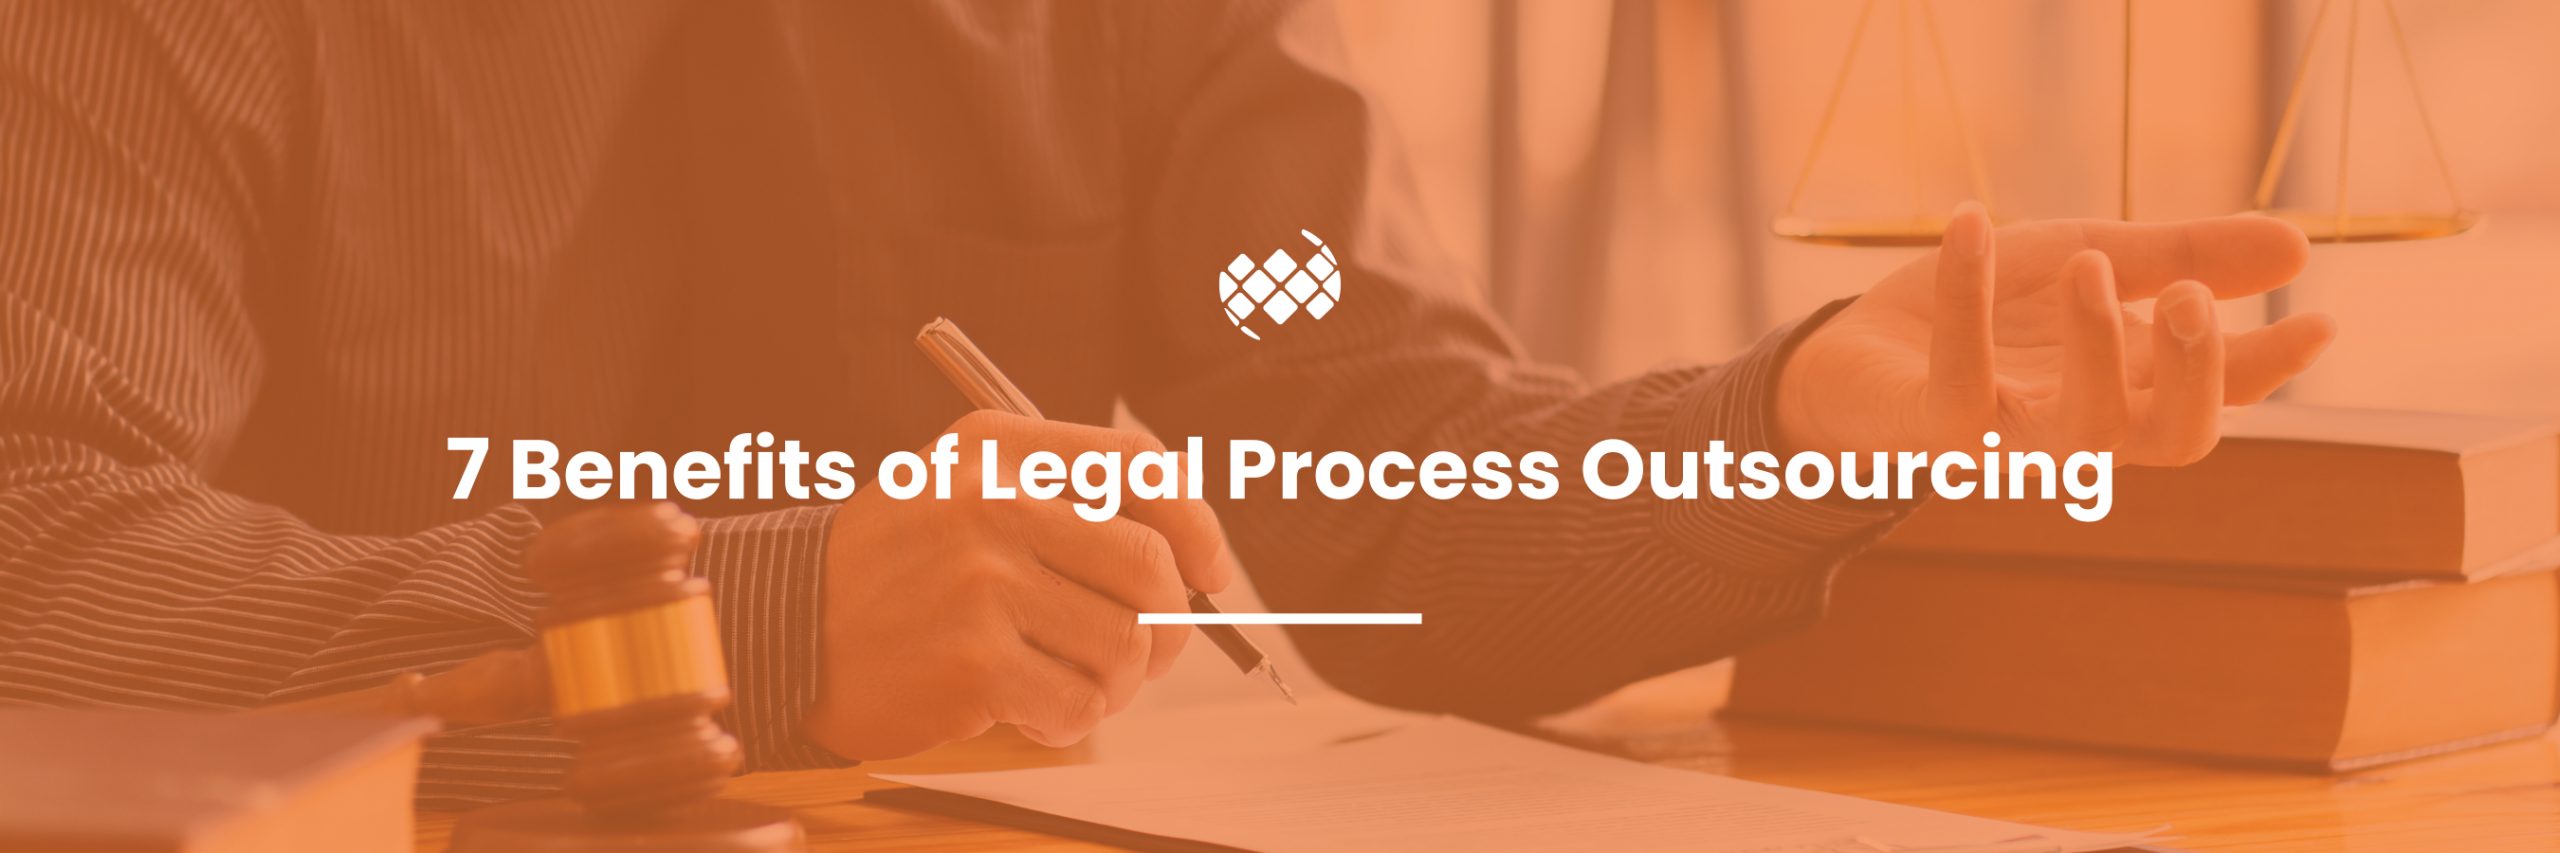 Benefits of Legal Process Outsourcing